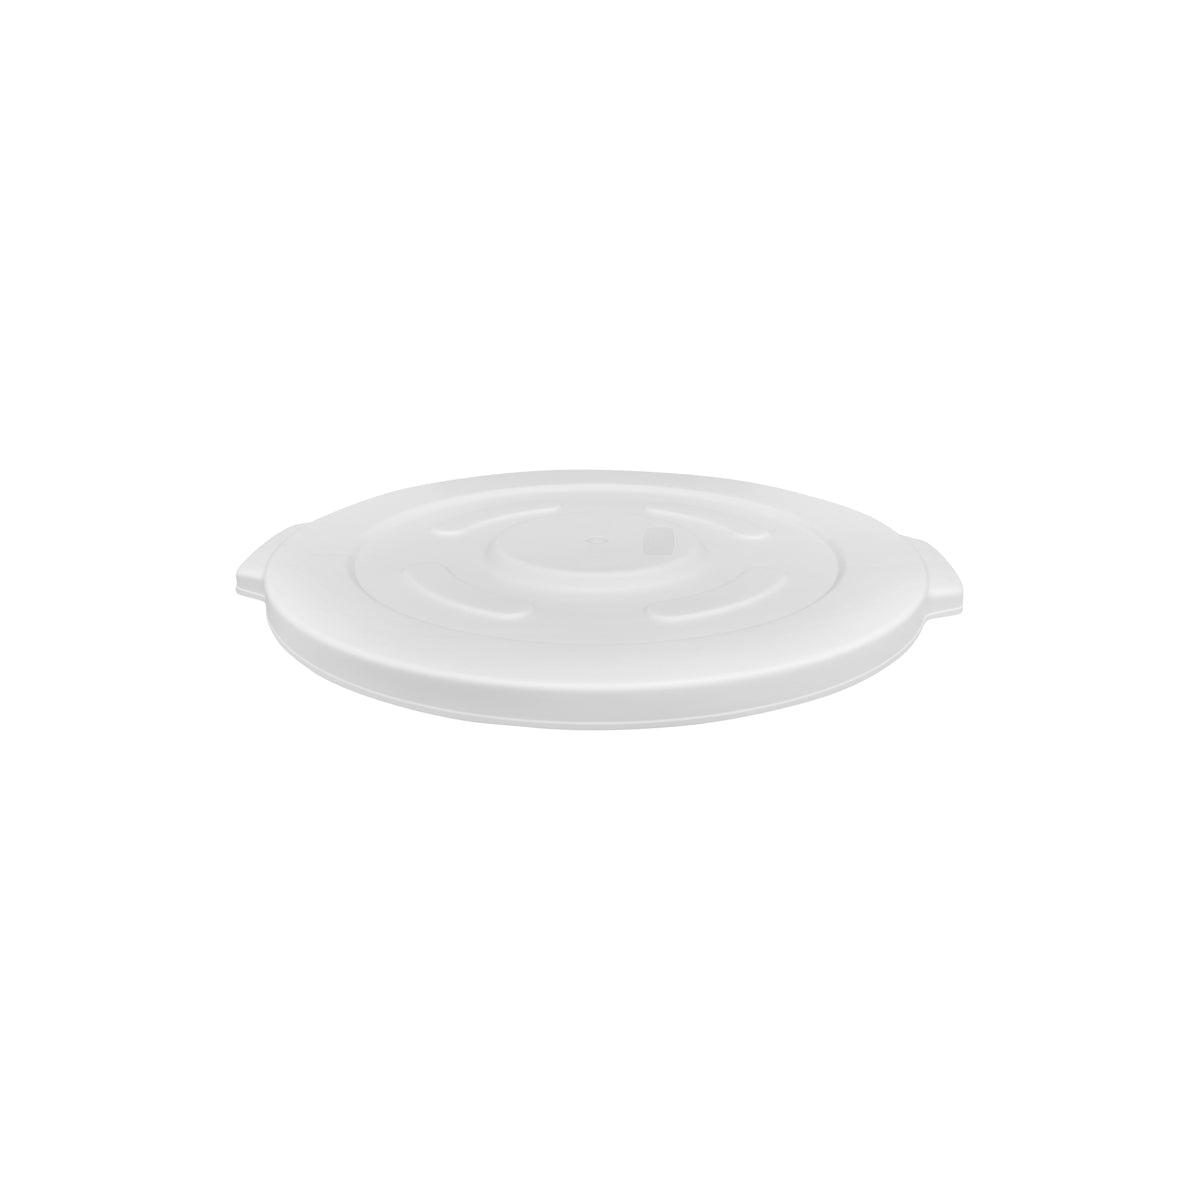 JW-CRC2P (WHITE) Jiwins Lid to Suit 75.7Lt Round Ingredient Container Tomkin Australia Hospitality Supplies